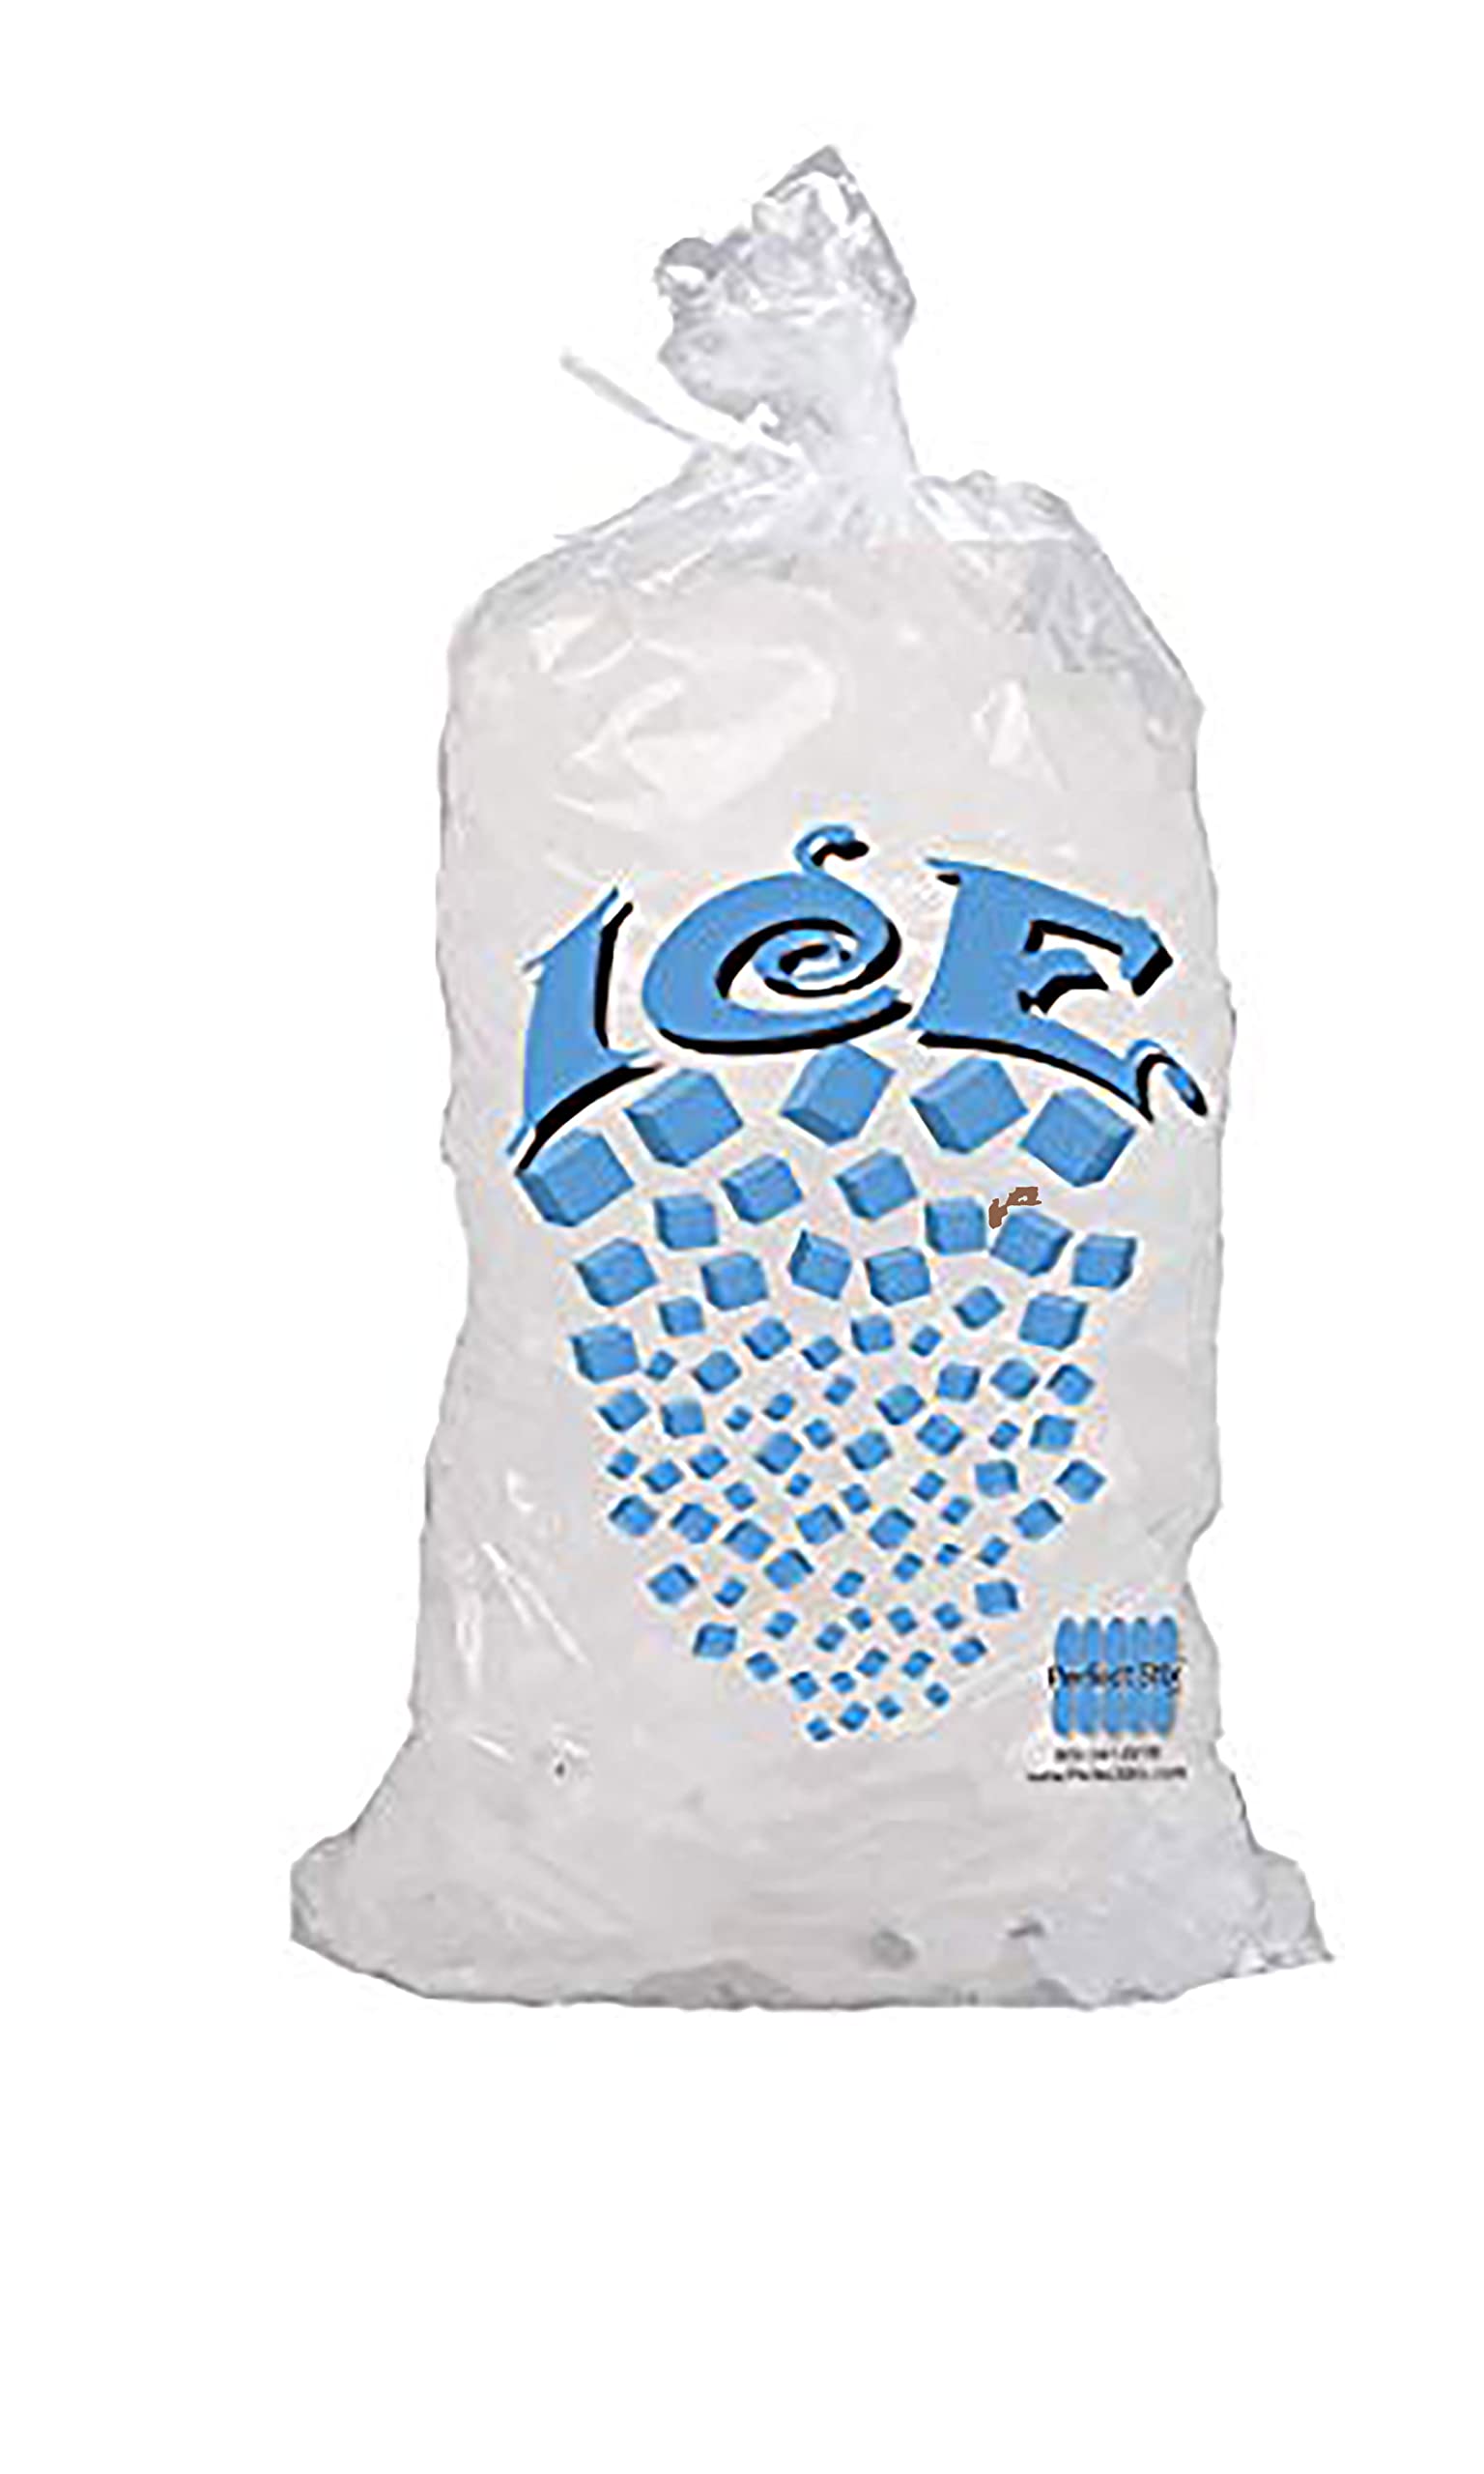 Silonn Countertop Ice Maker (45lbs/Day) + Perfect Stix Icebag10TT-100 Ice Bags (10 lbs) with Twist Tie Enclosure